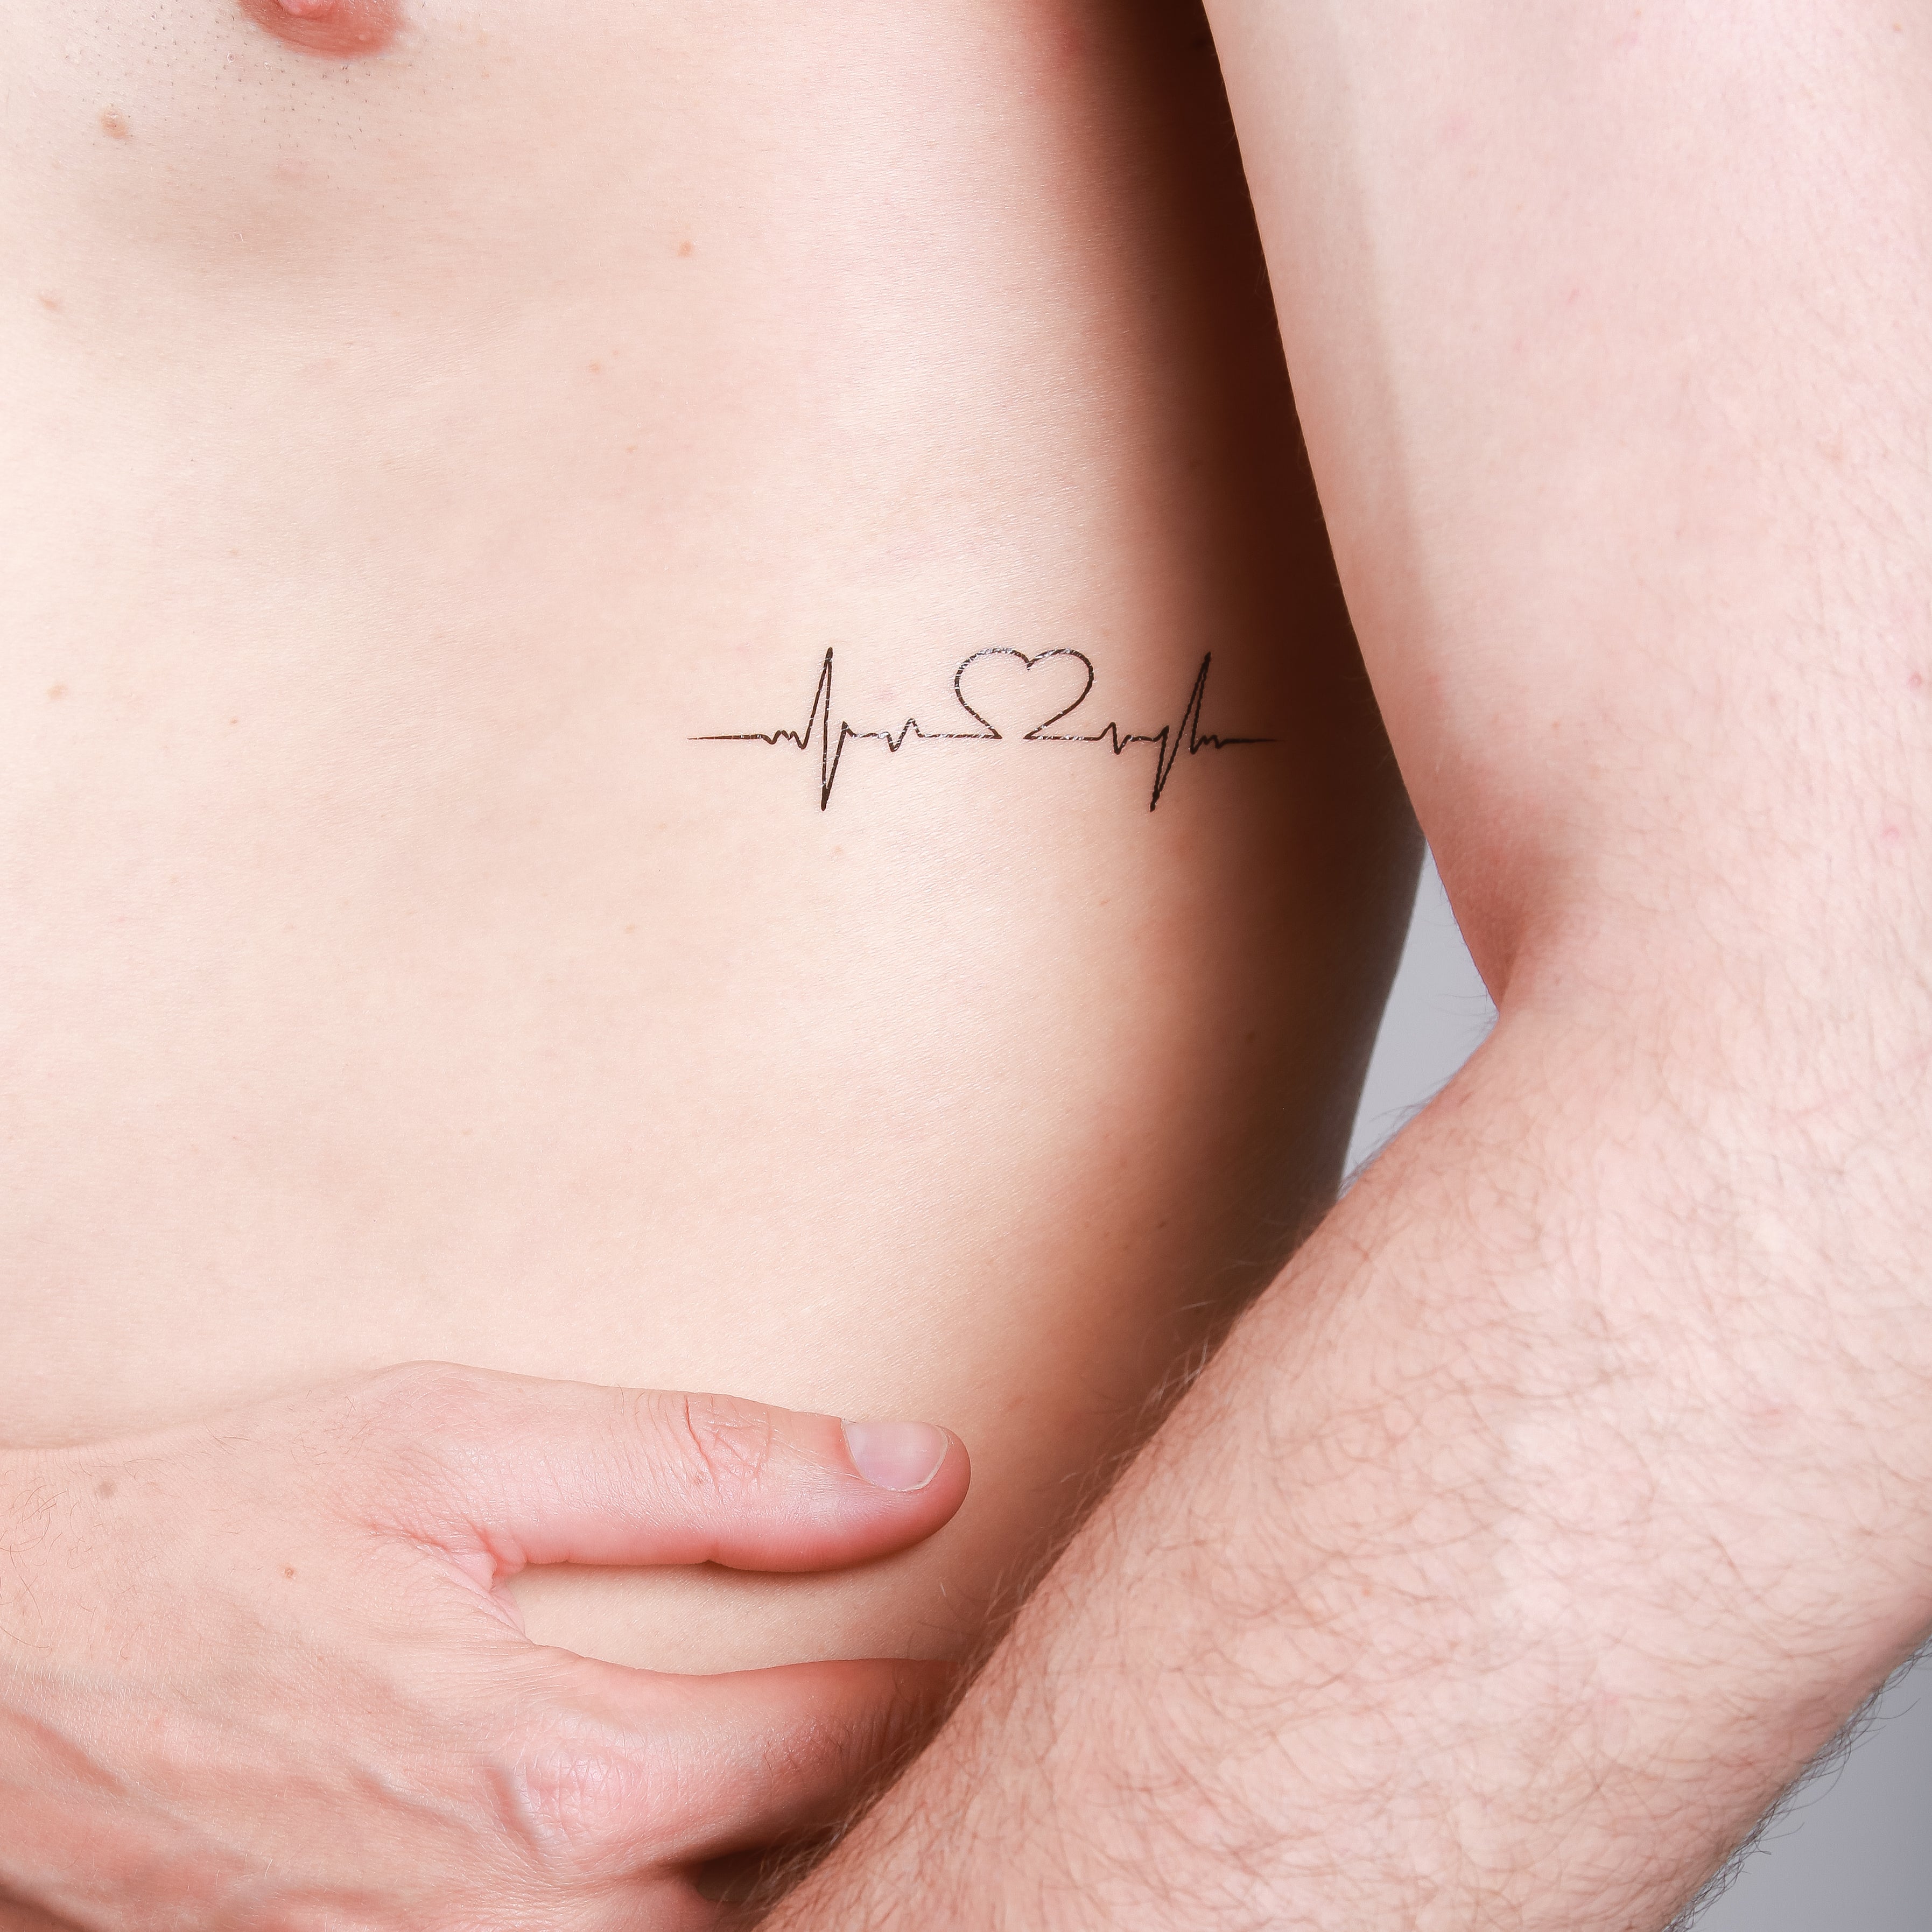 Amazon.com : 2 PCS Heartbeat Herbal Personality Electrocardiogram  Waterproof And Durable Tattoo Stickers Male And Female Collarbone Wrist  Tattoos : Beauty & Personal Care